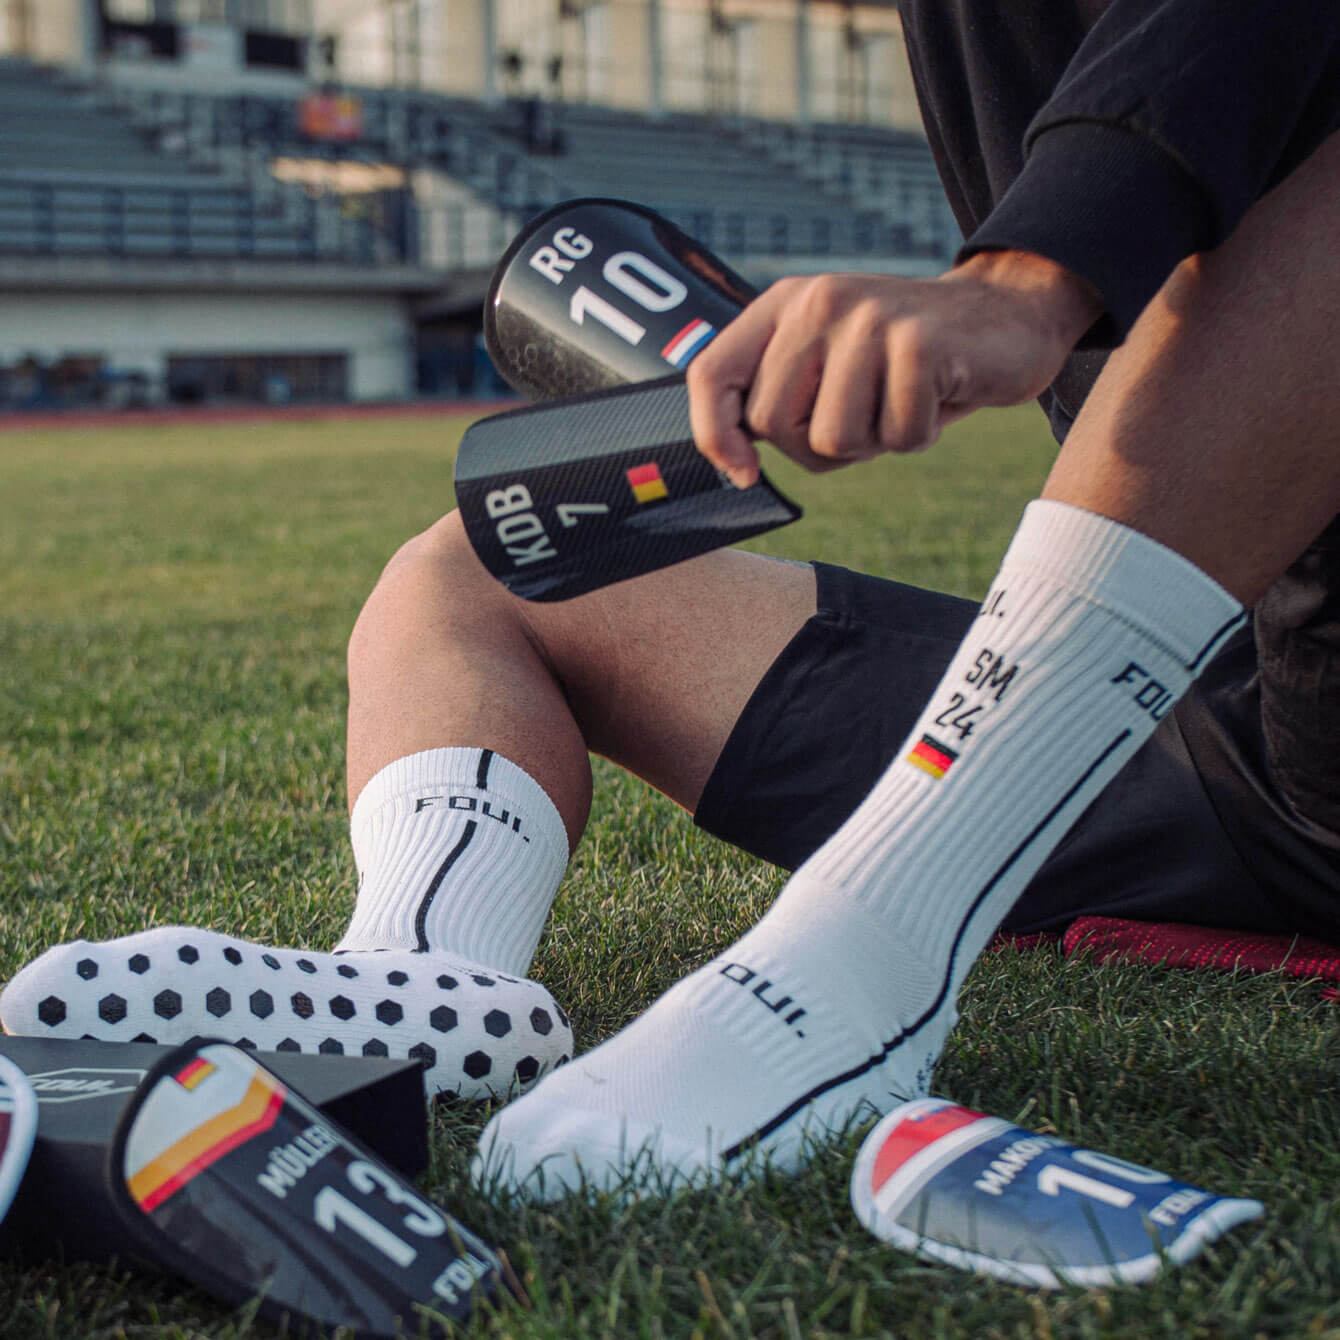 FOUL - Flexible custom shin guards and many products for football players